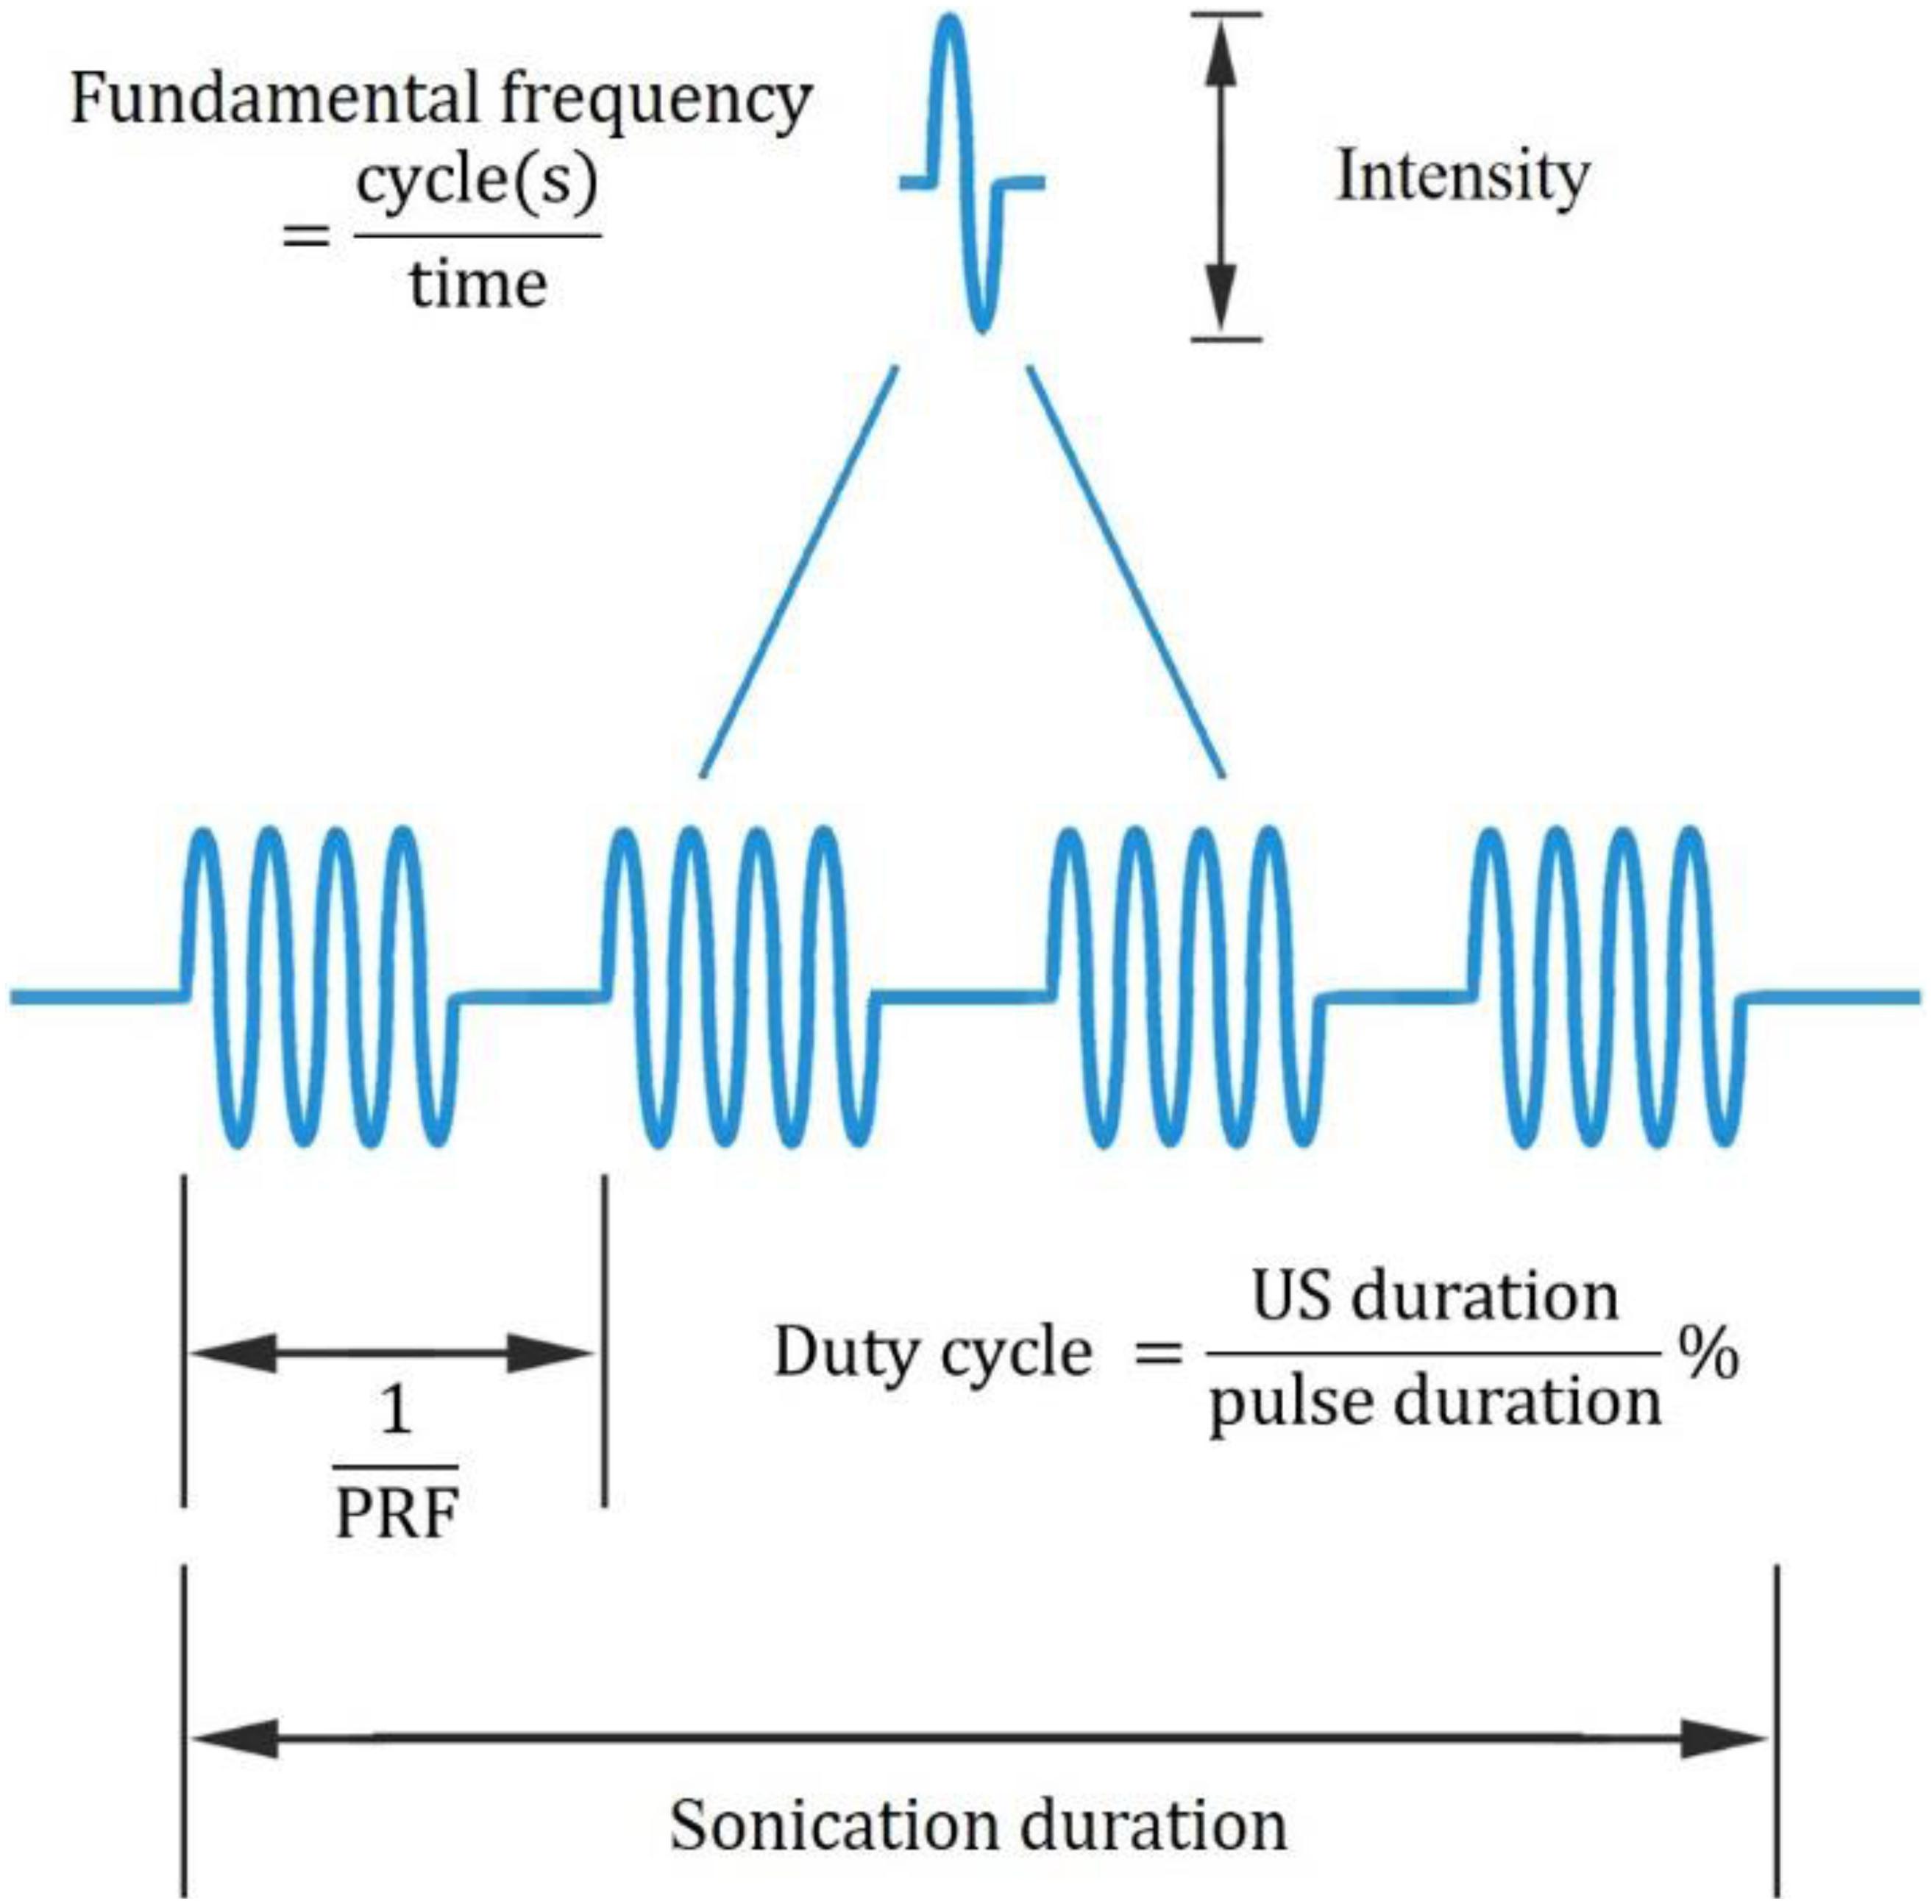 Frequency-specific neuromodulation of local and distant